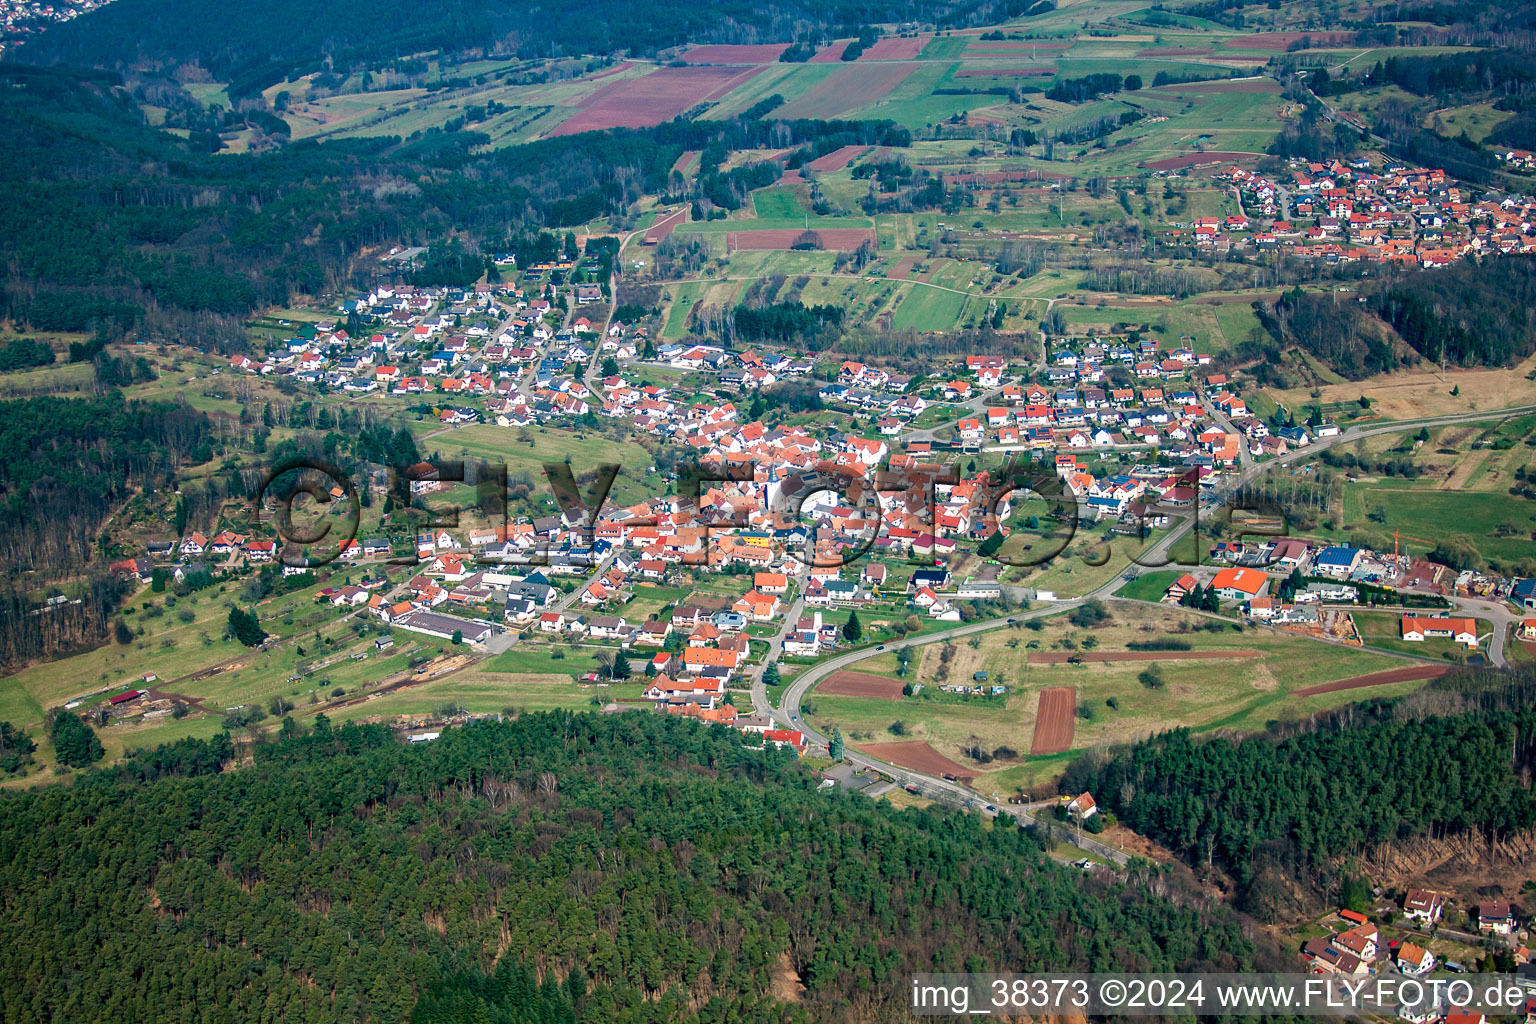 Oblique view of District Gossersweiler in Gossersweiler-Stein in the state Rhineland-Palatinate, Germany